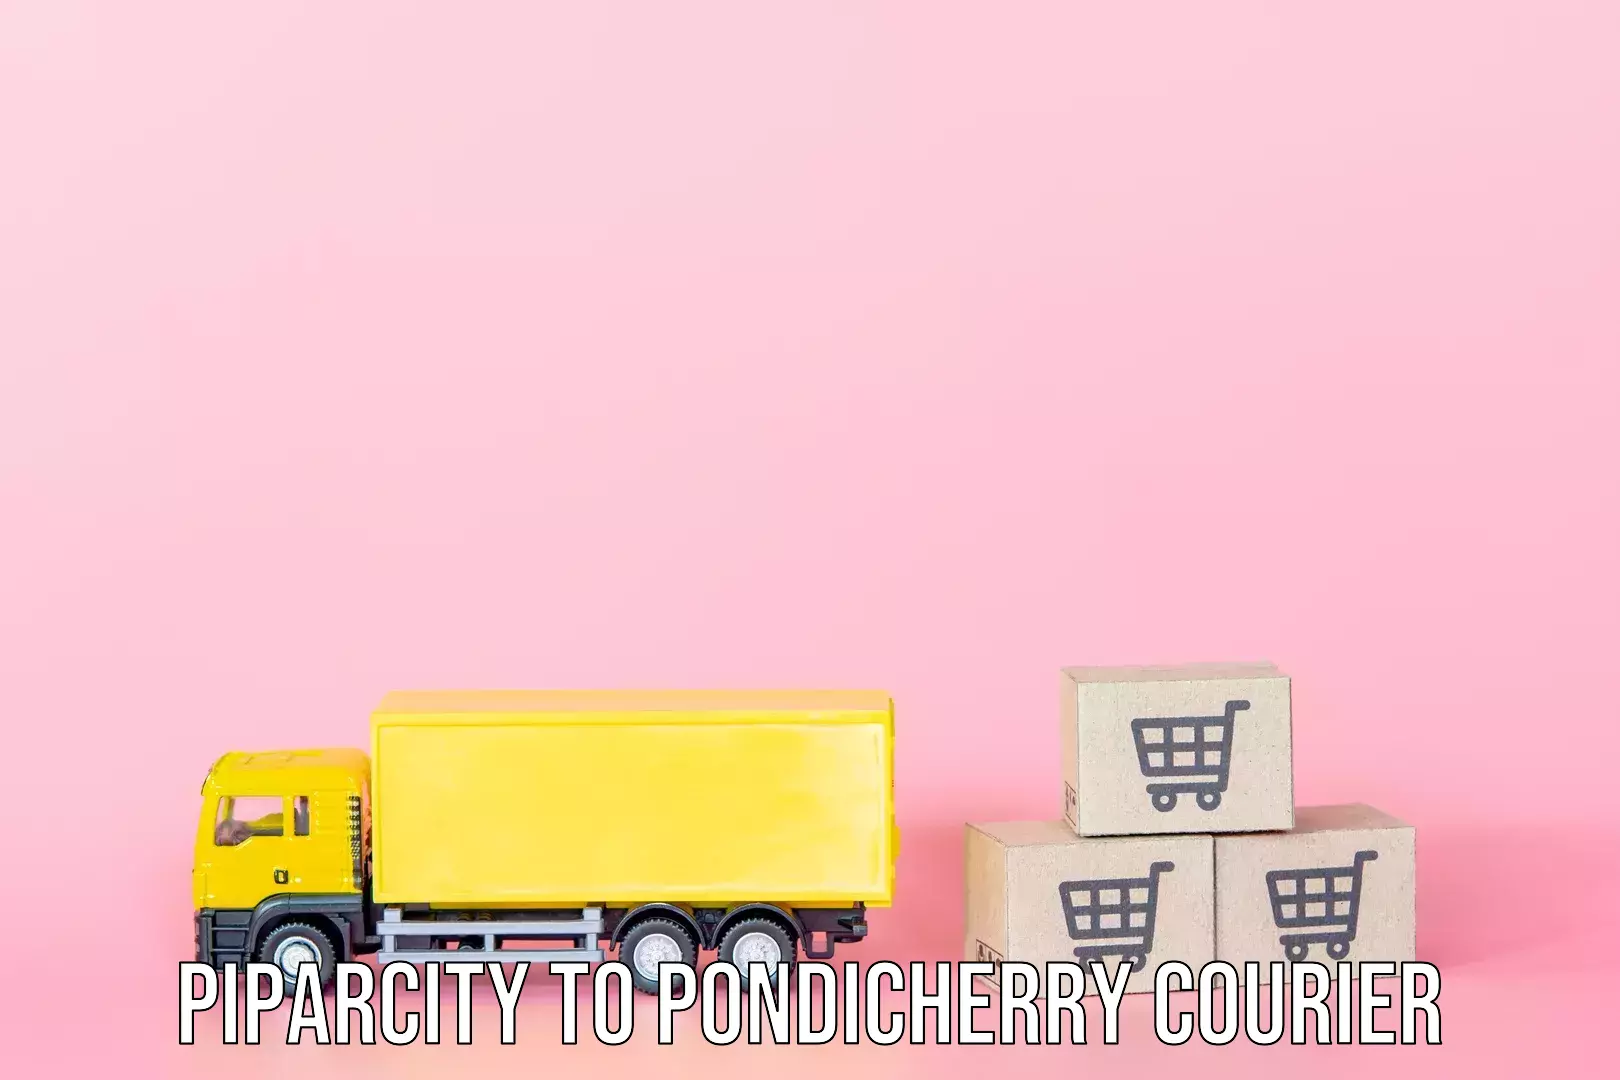 Luggage delivery providers Piparcity to Pondicherry